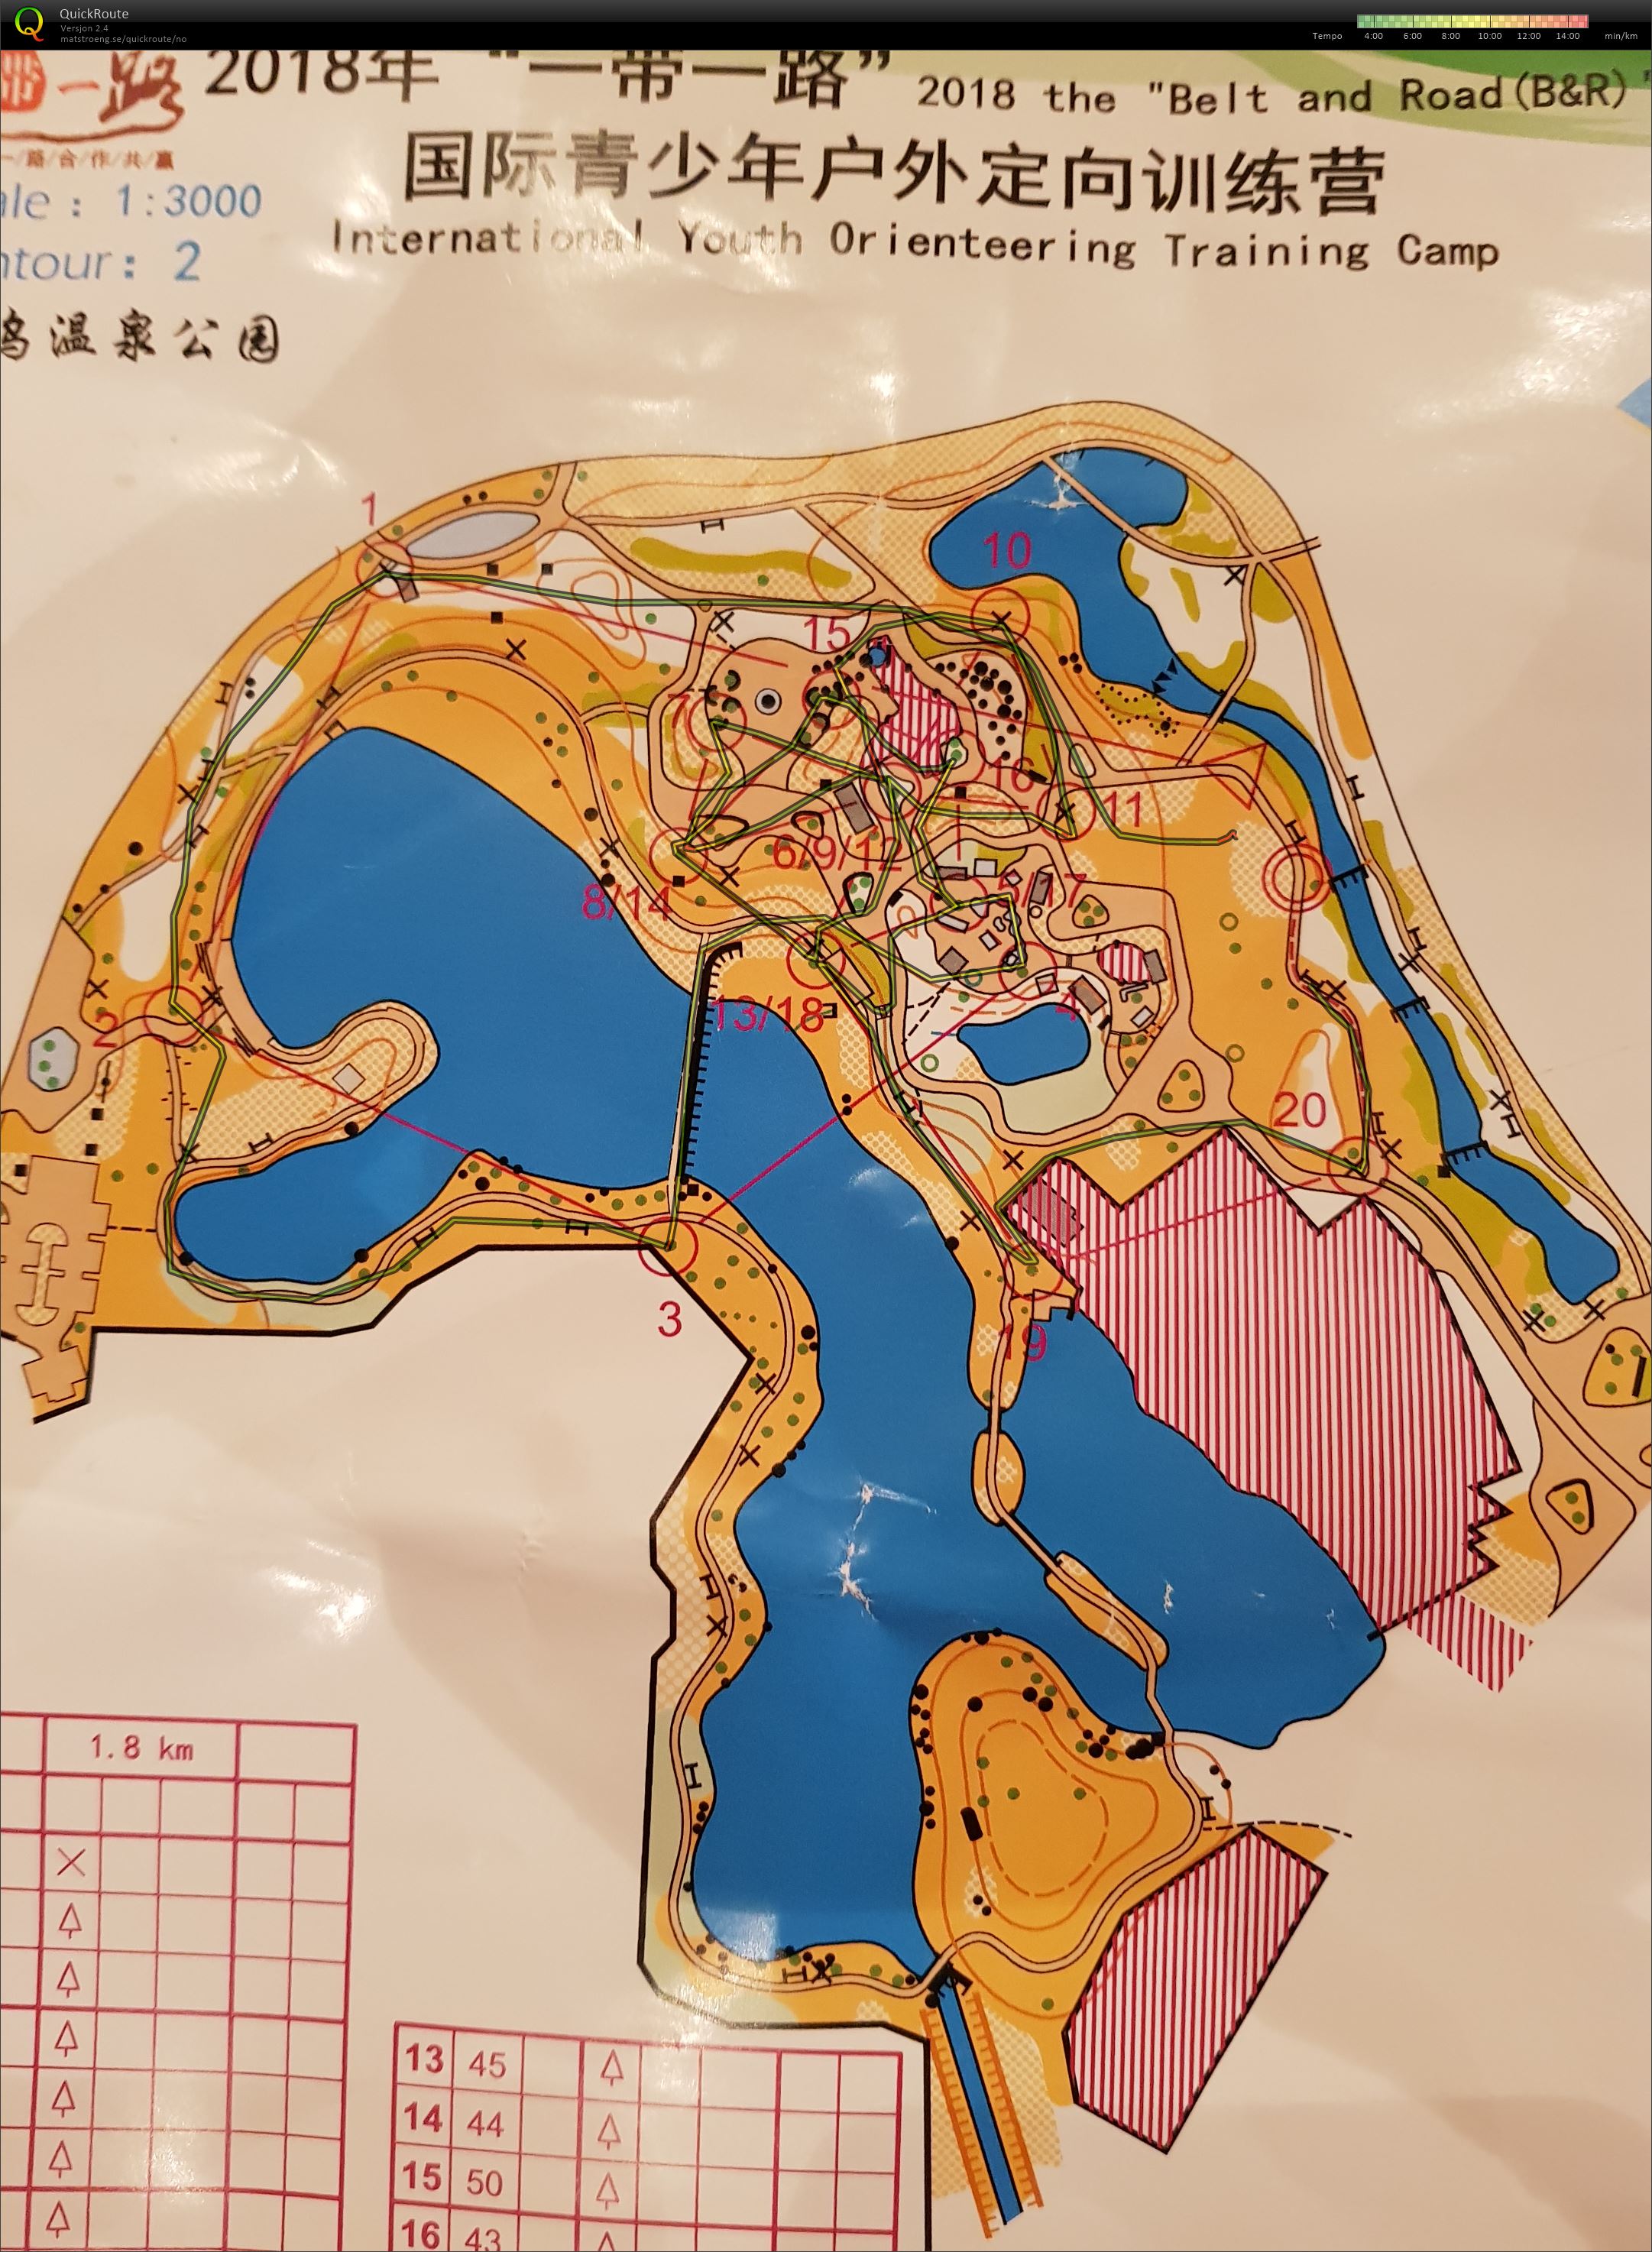 Belt and Road International Youth Orienteering Camp (27.10.2018)